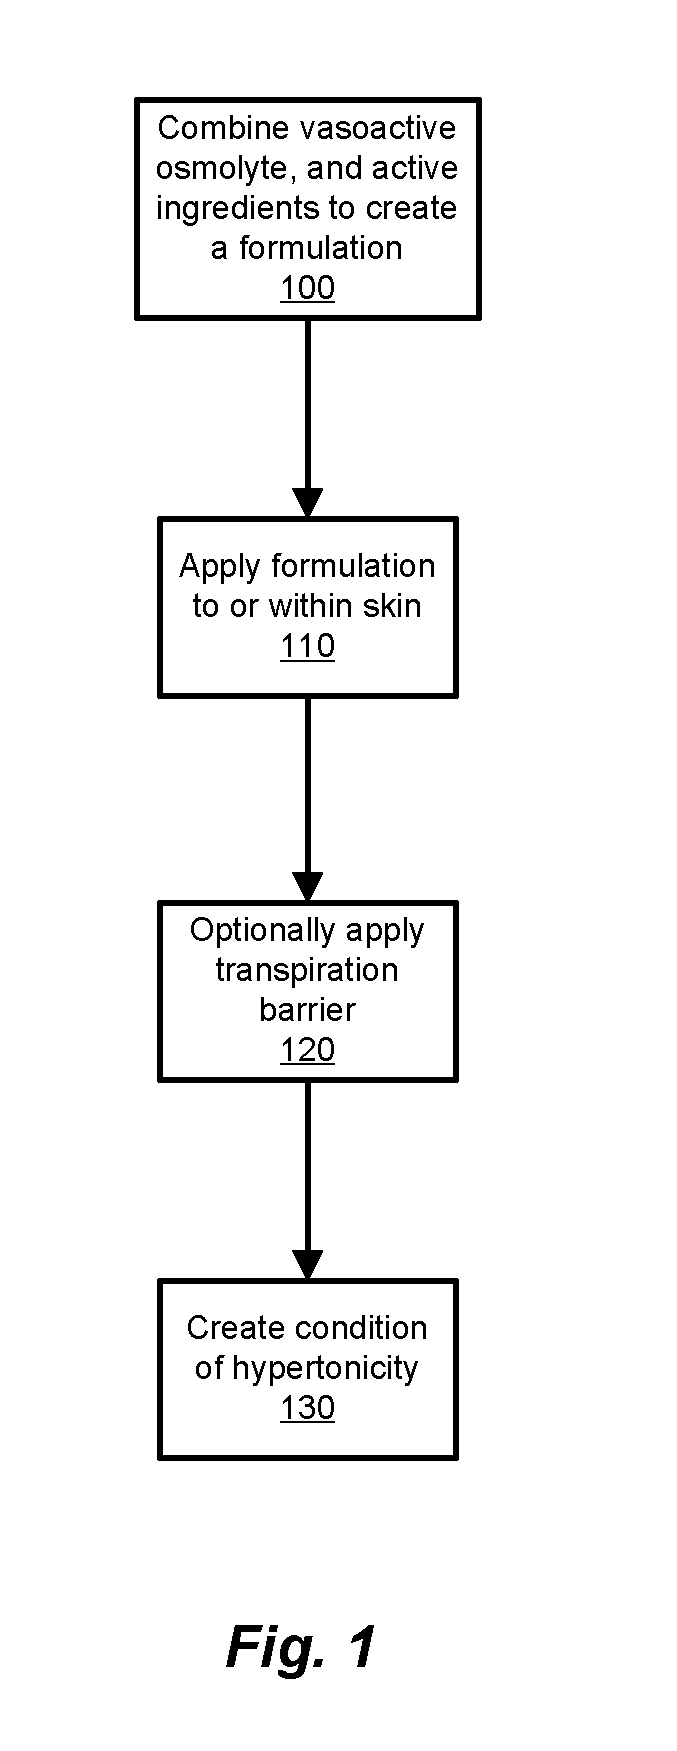 Transdermal Drug Delivery using an Osmolyte and Vasoactive Agent